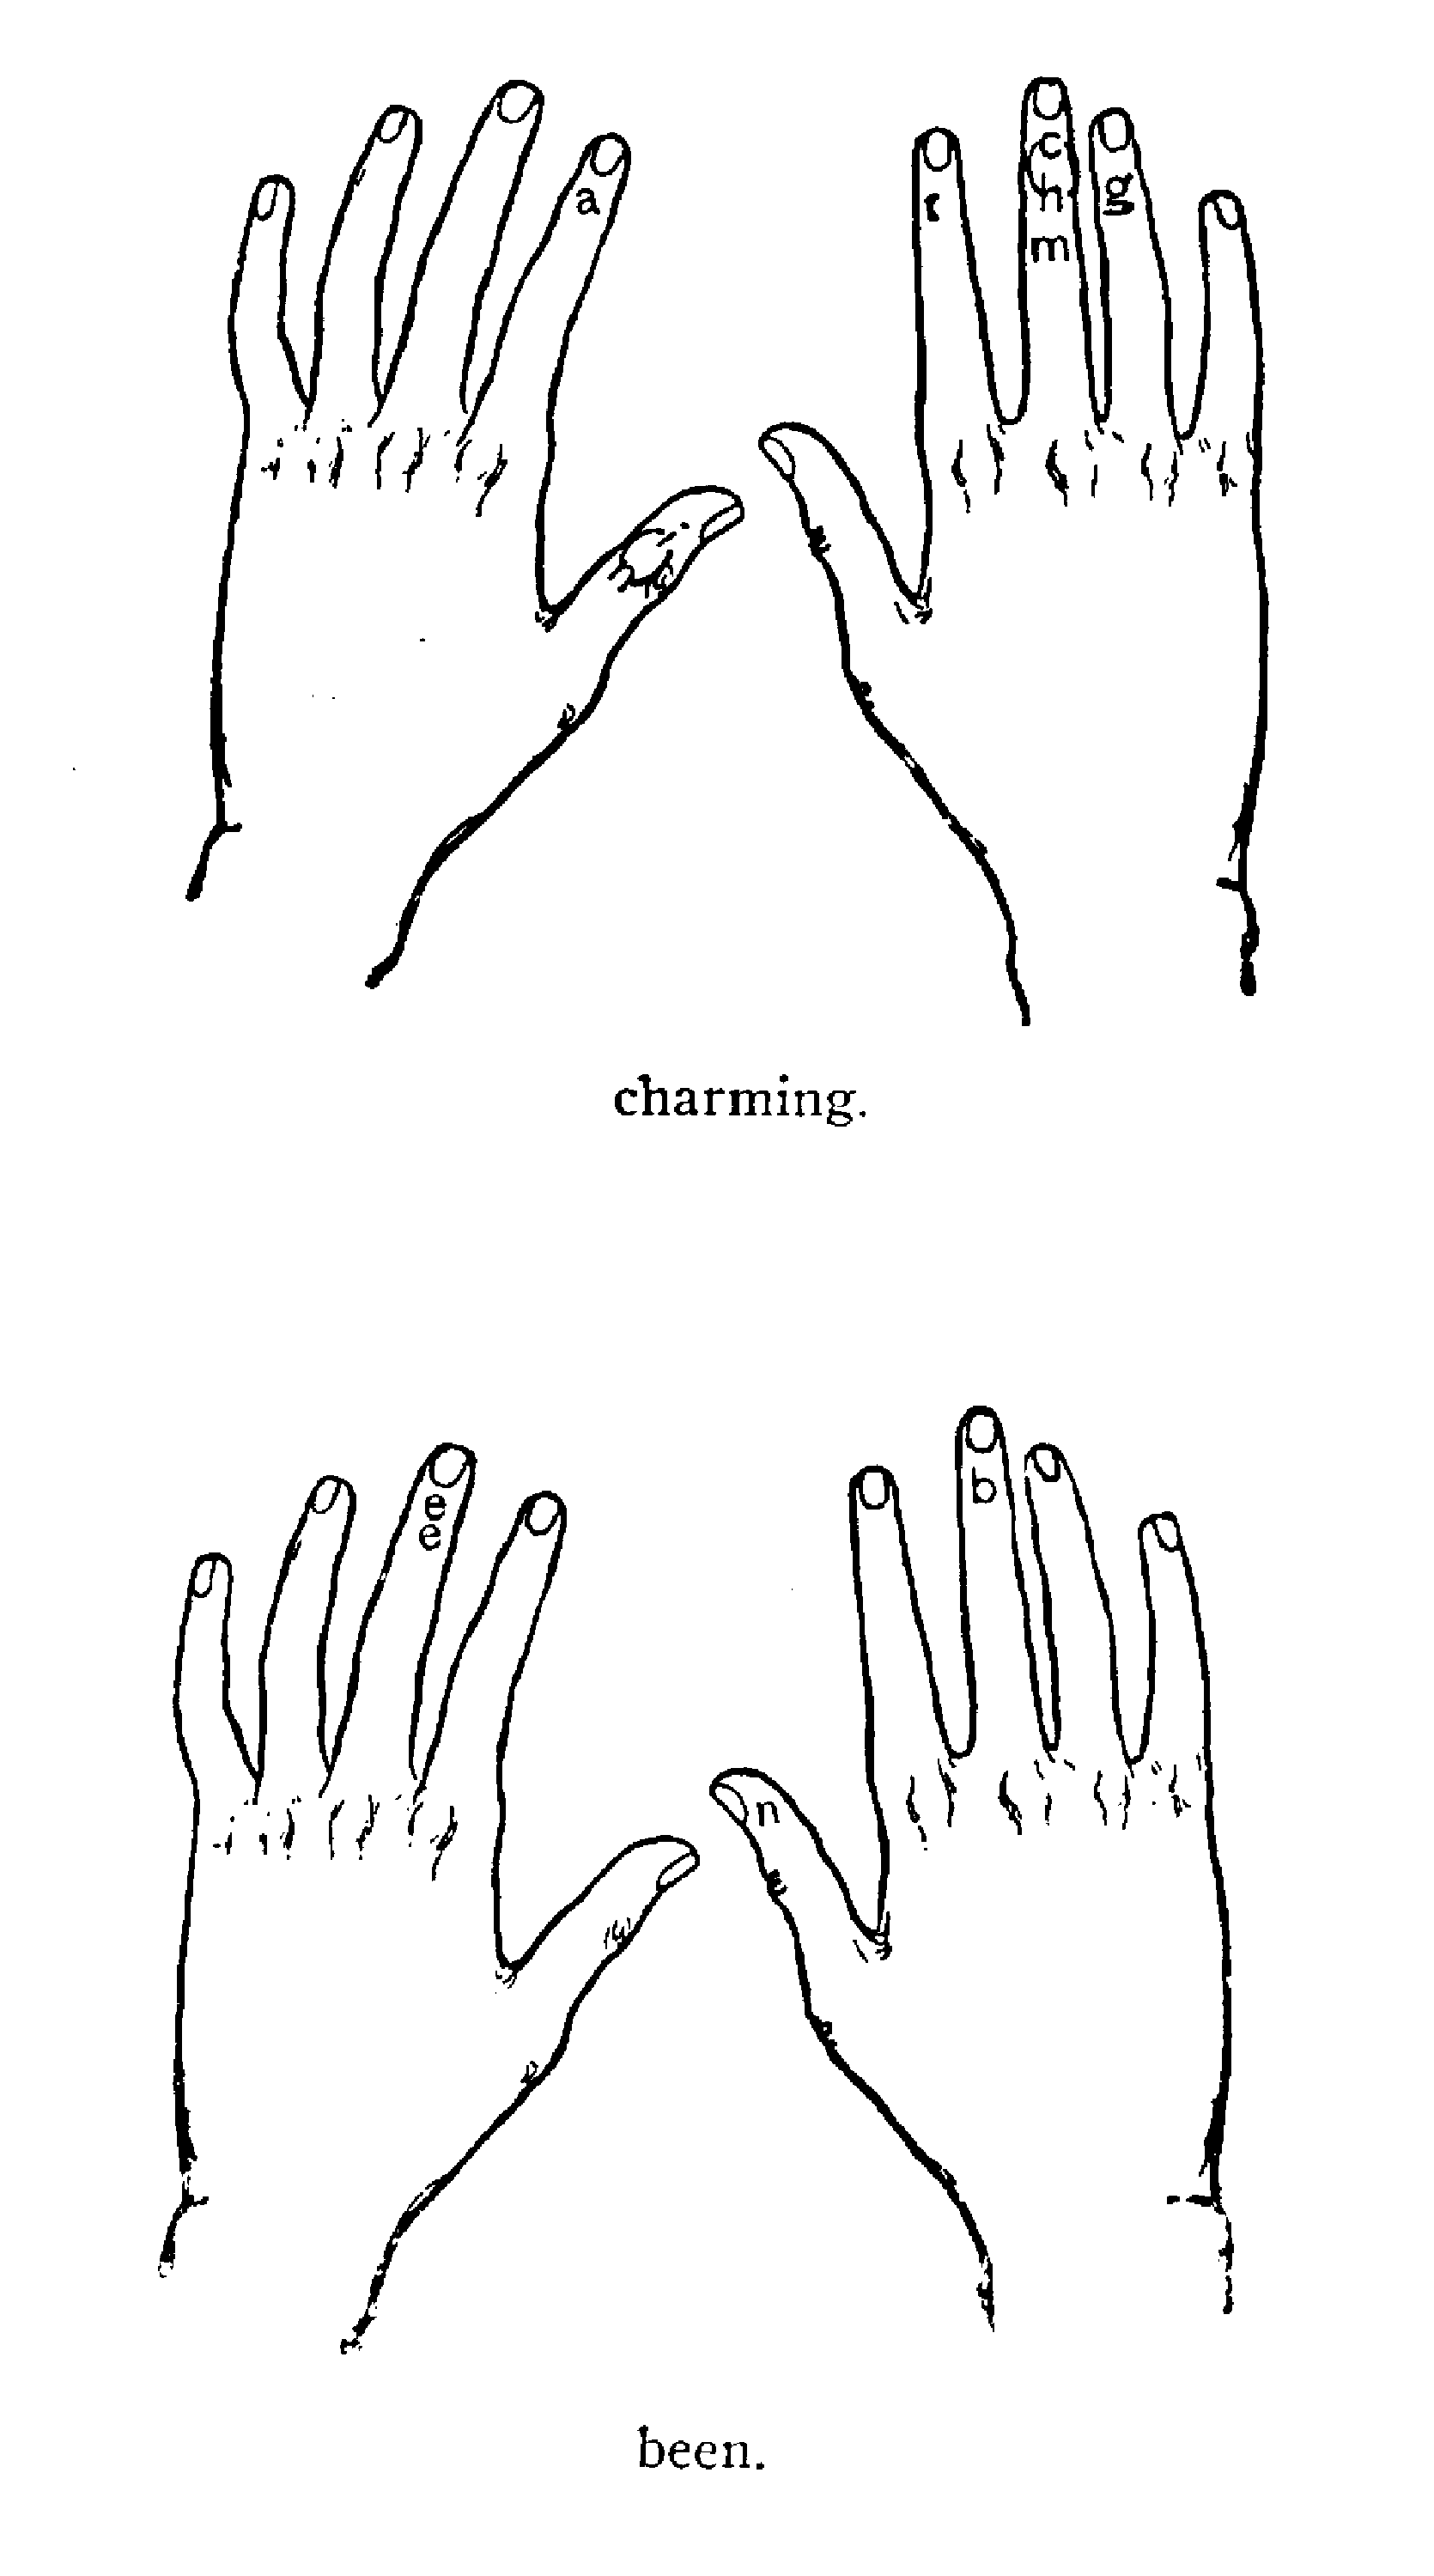 Line drawing of correct finger placement.